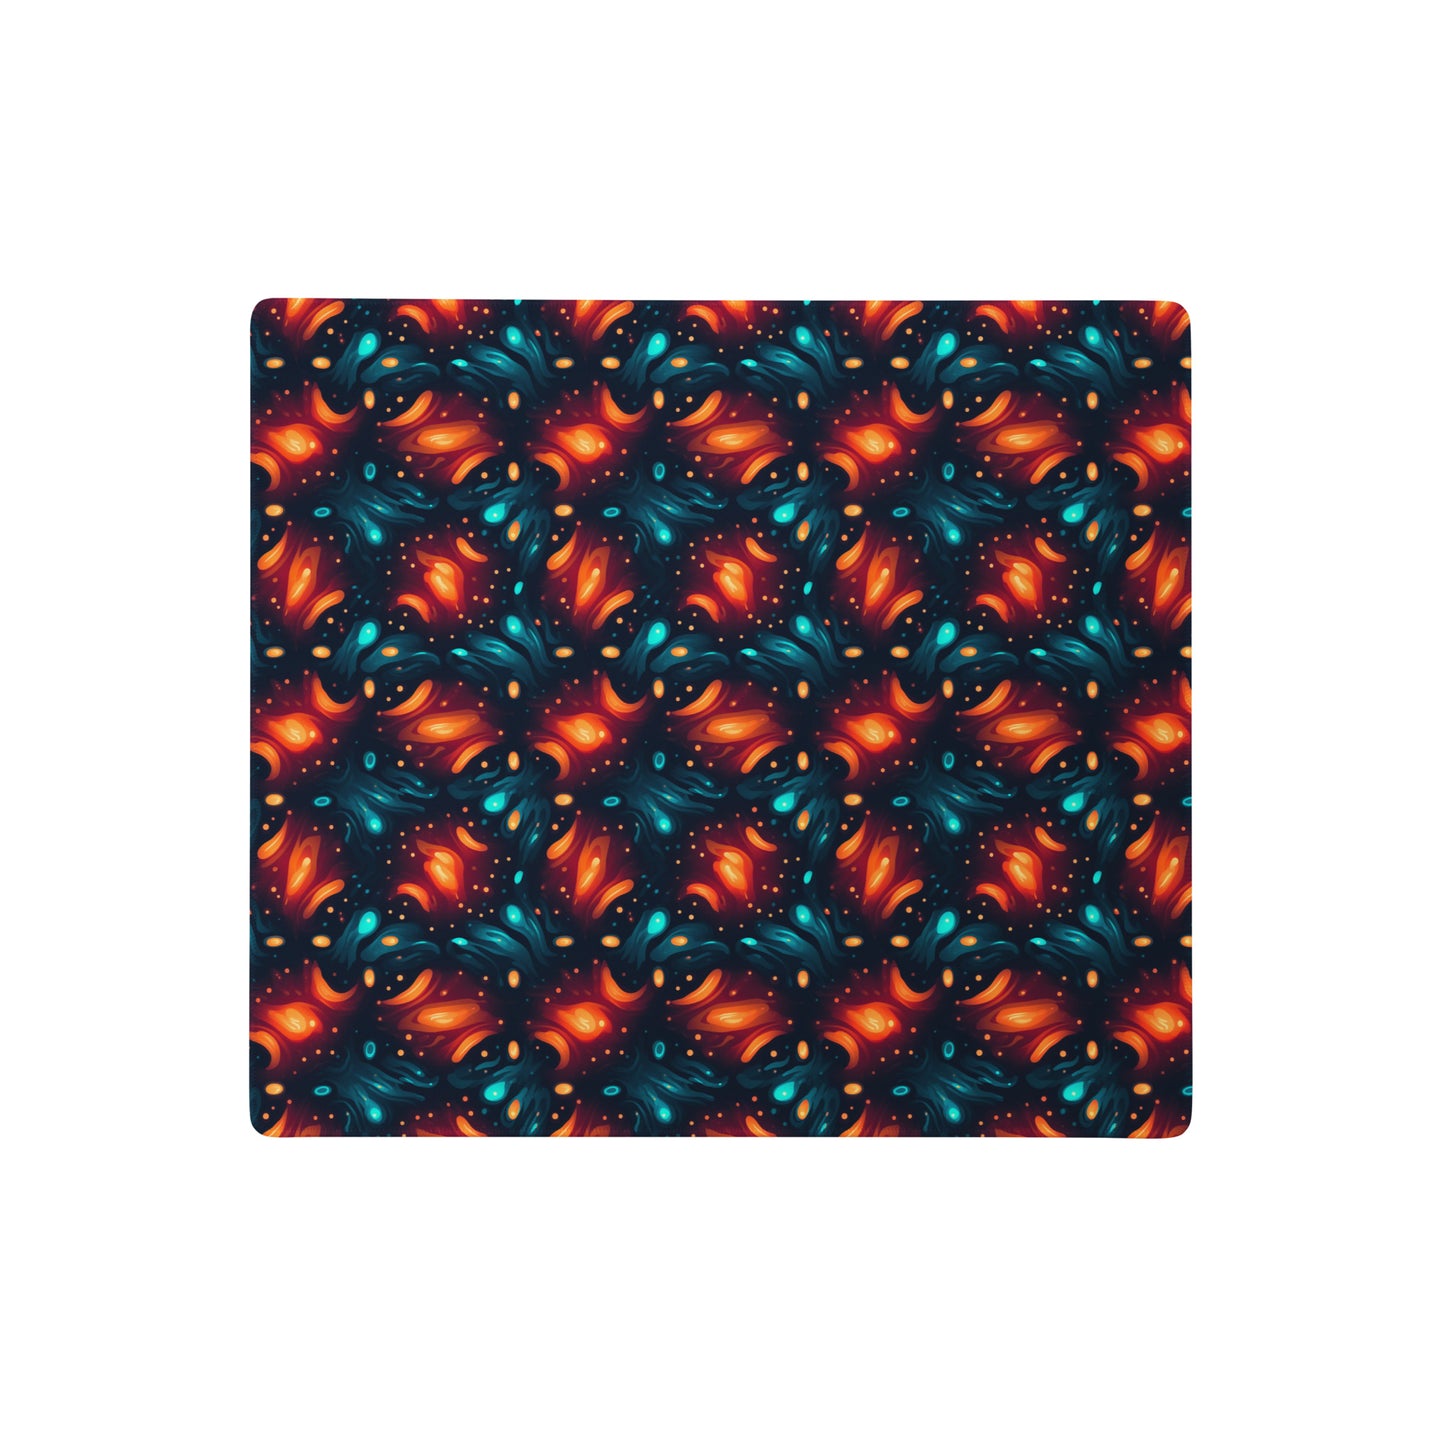 A 18" x 16" desk pad with a blue and orange abstract cross hatch pattern.